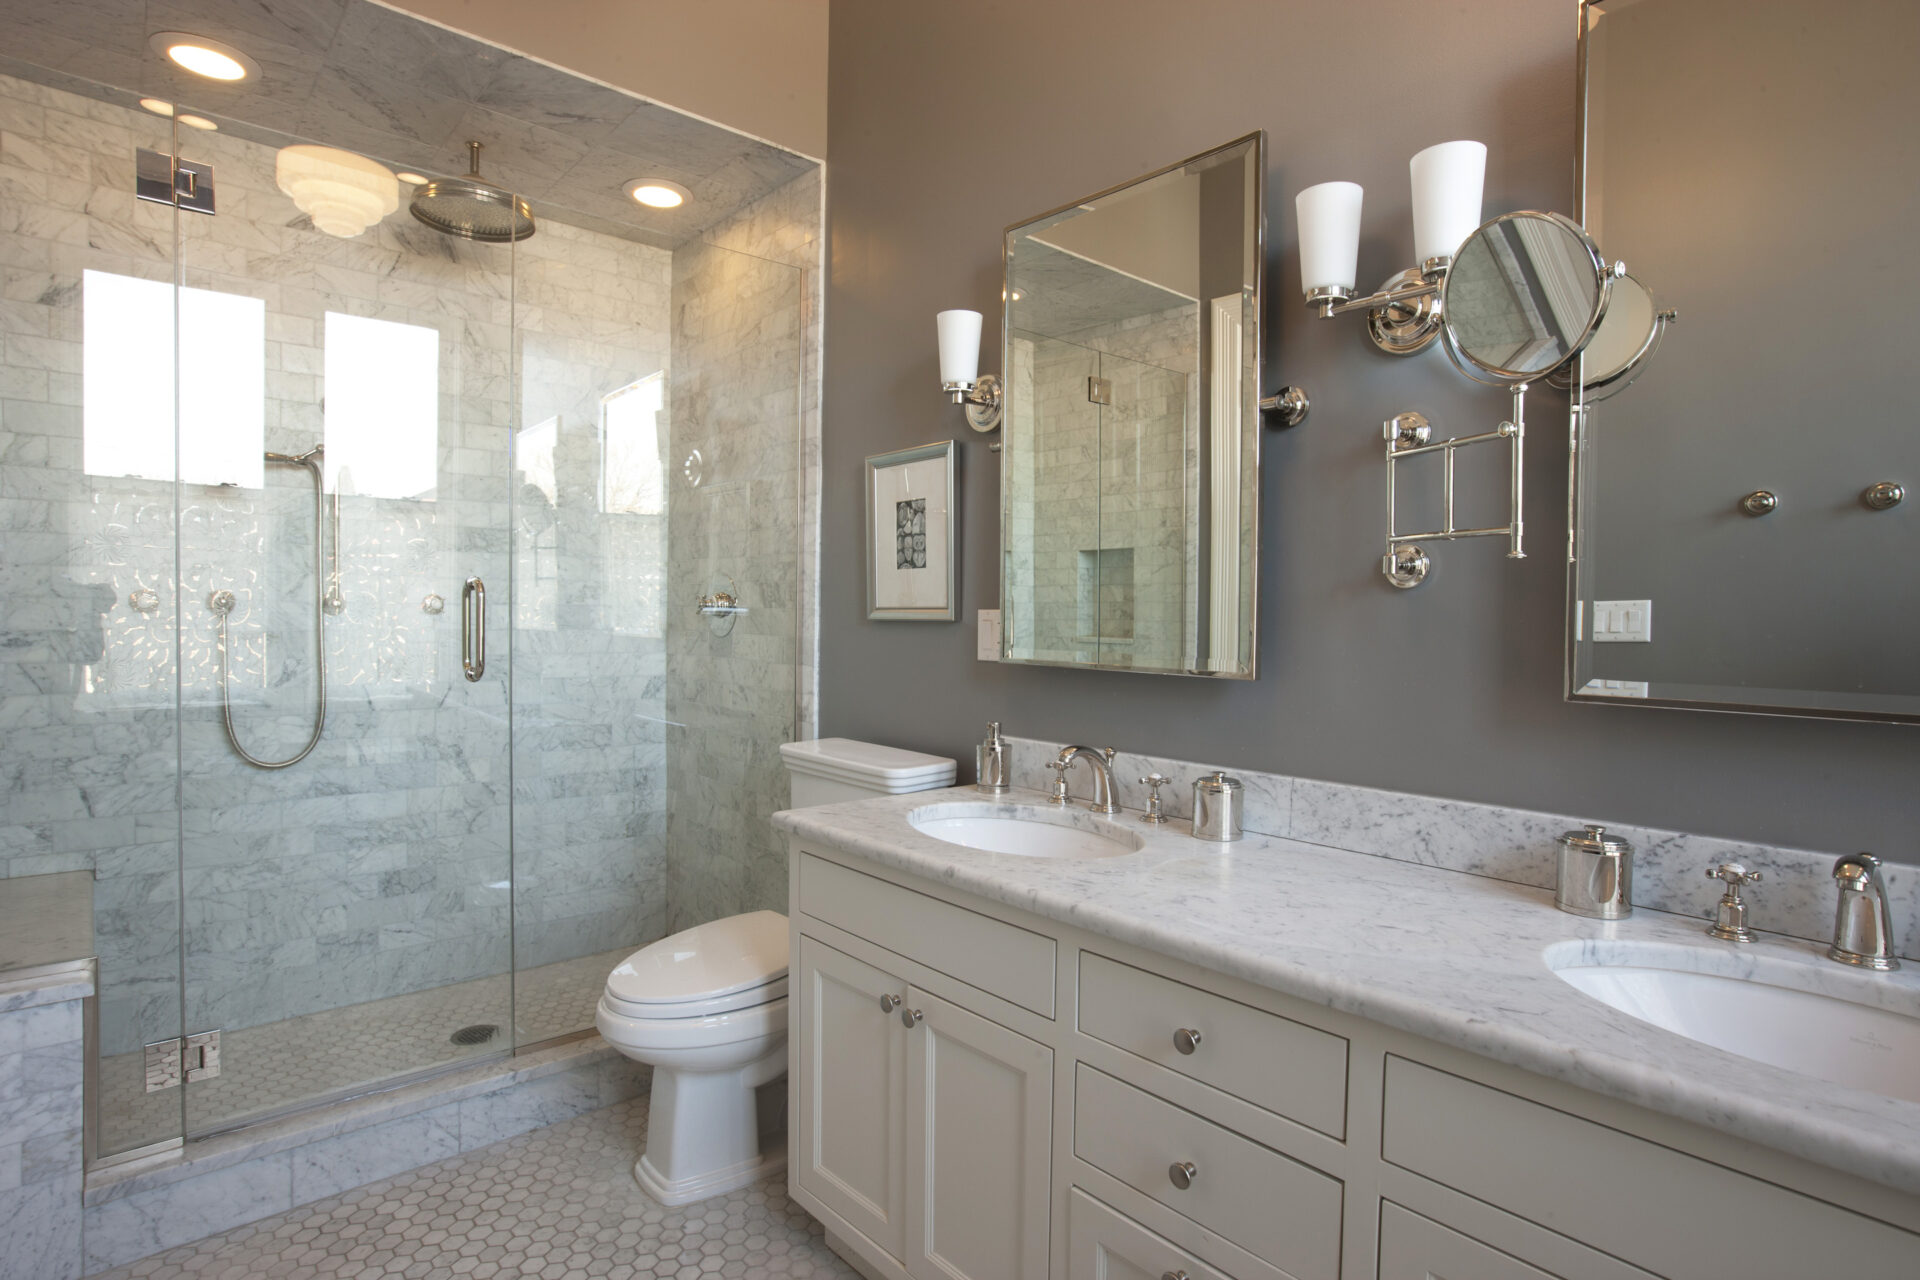 White and gray color scheme for bathroom